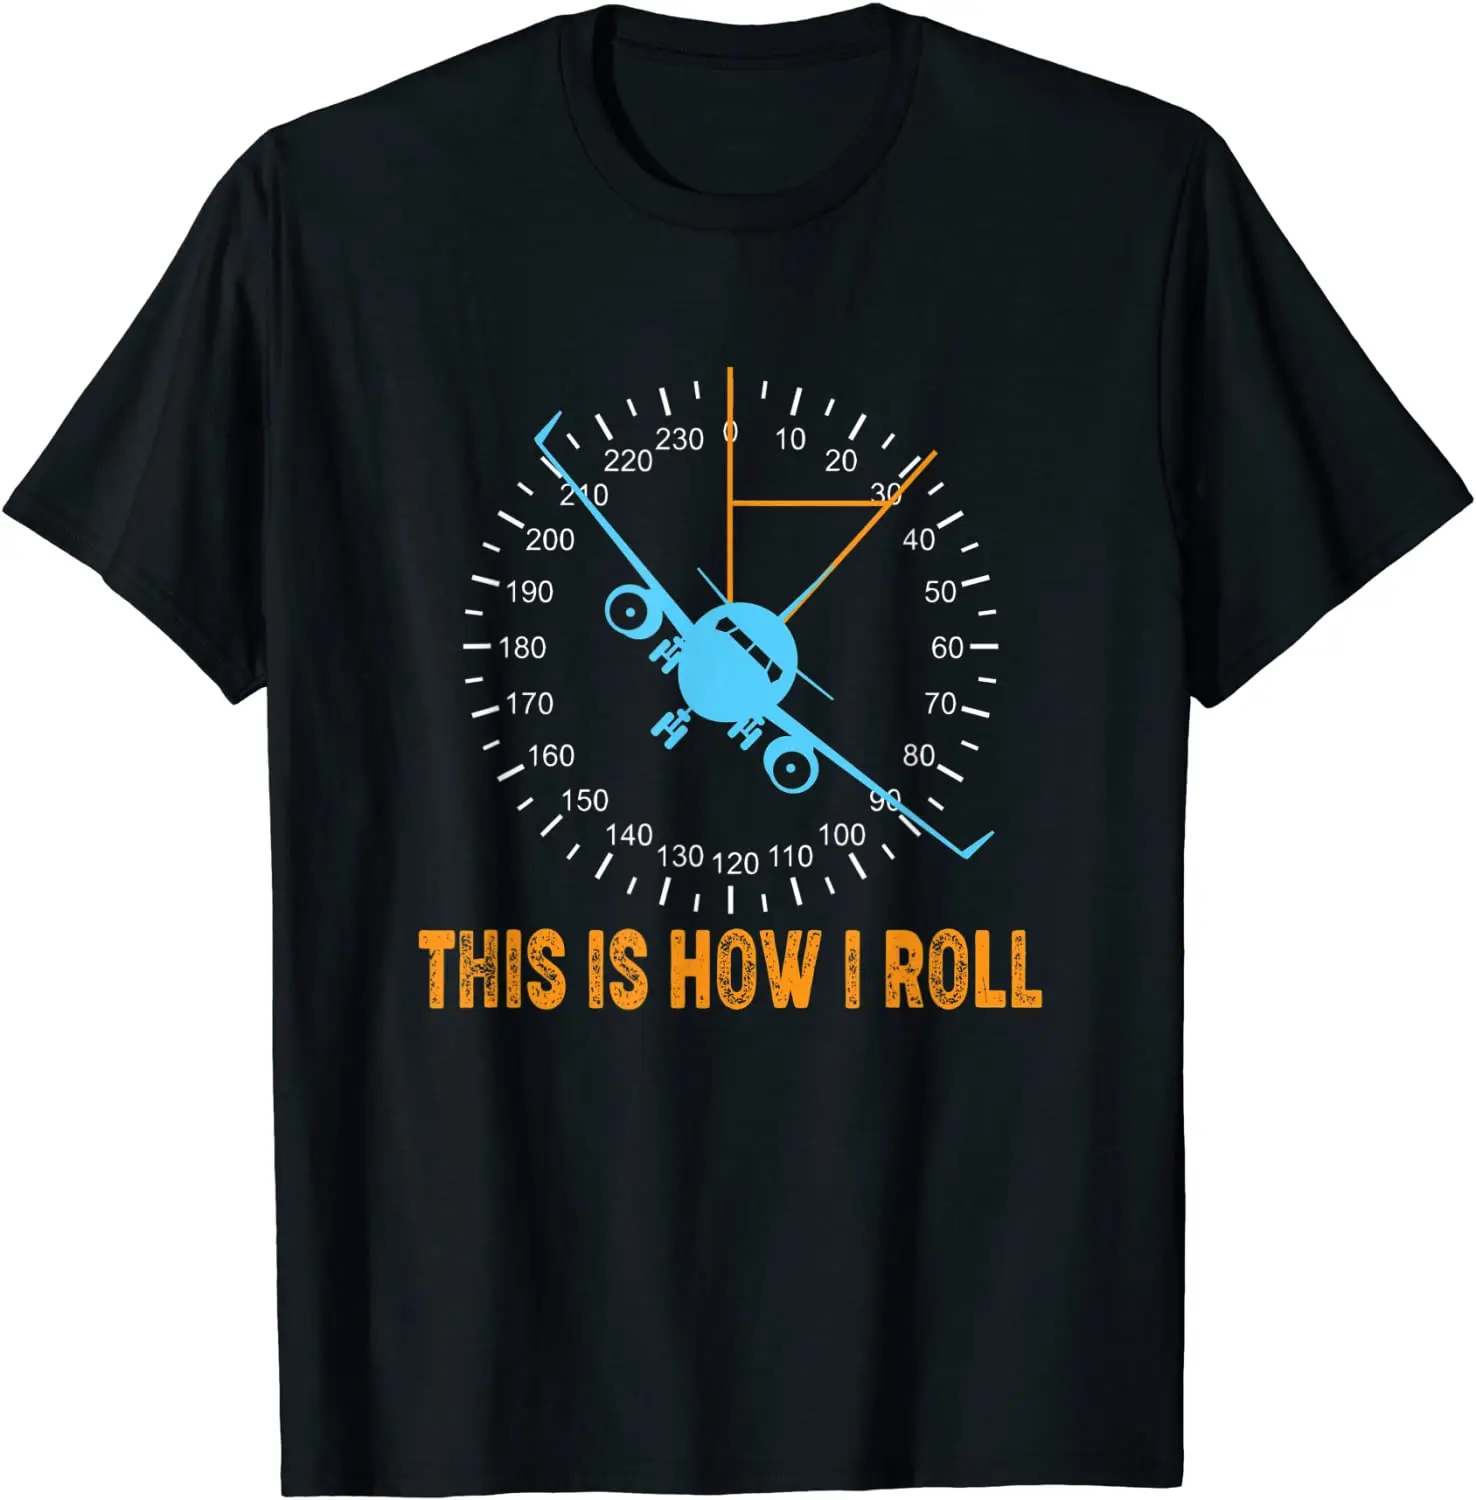 

This Is How I Roll Airplane Pilot Shirt Aviation Men T-Shirt Short Casual 100% Cotton Shirts Size S-3XL